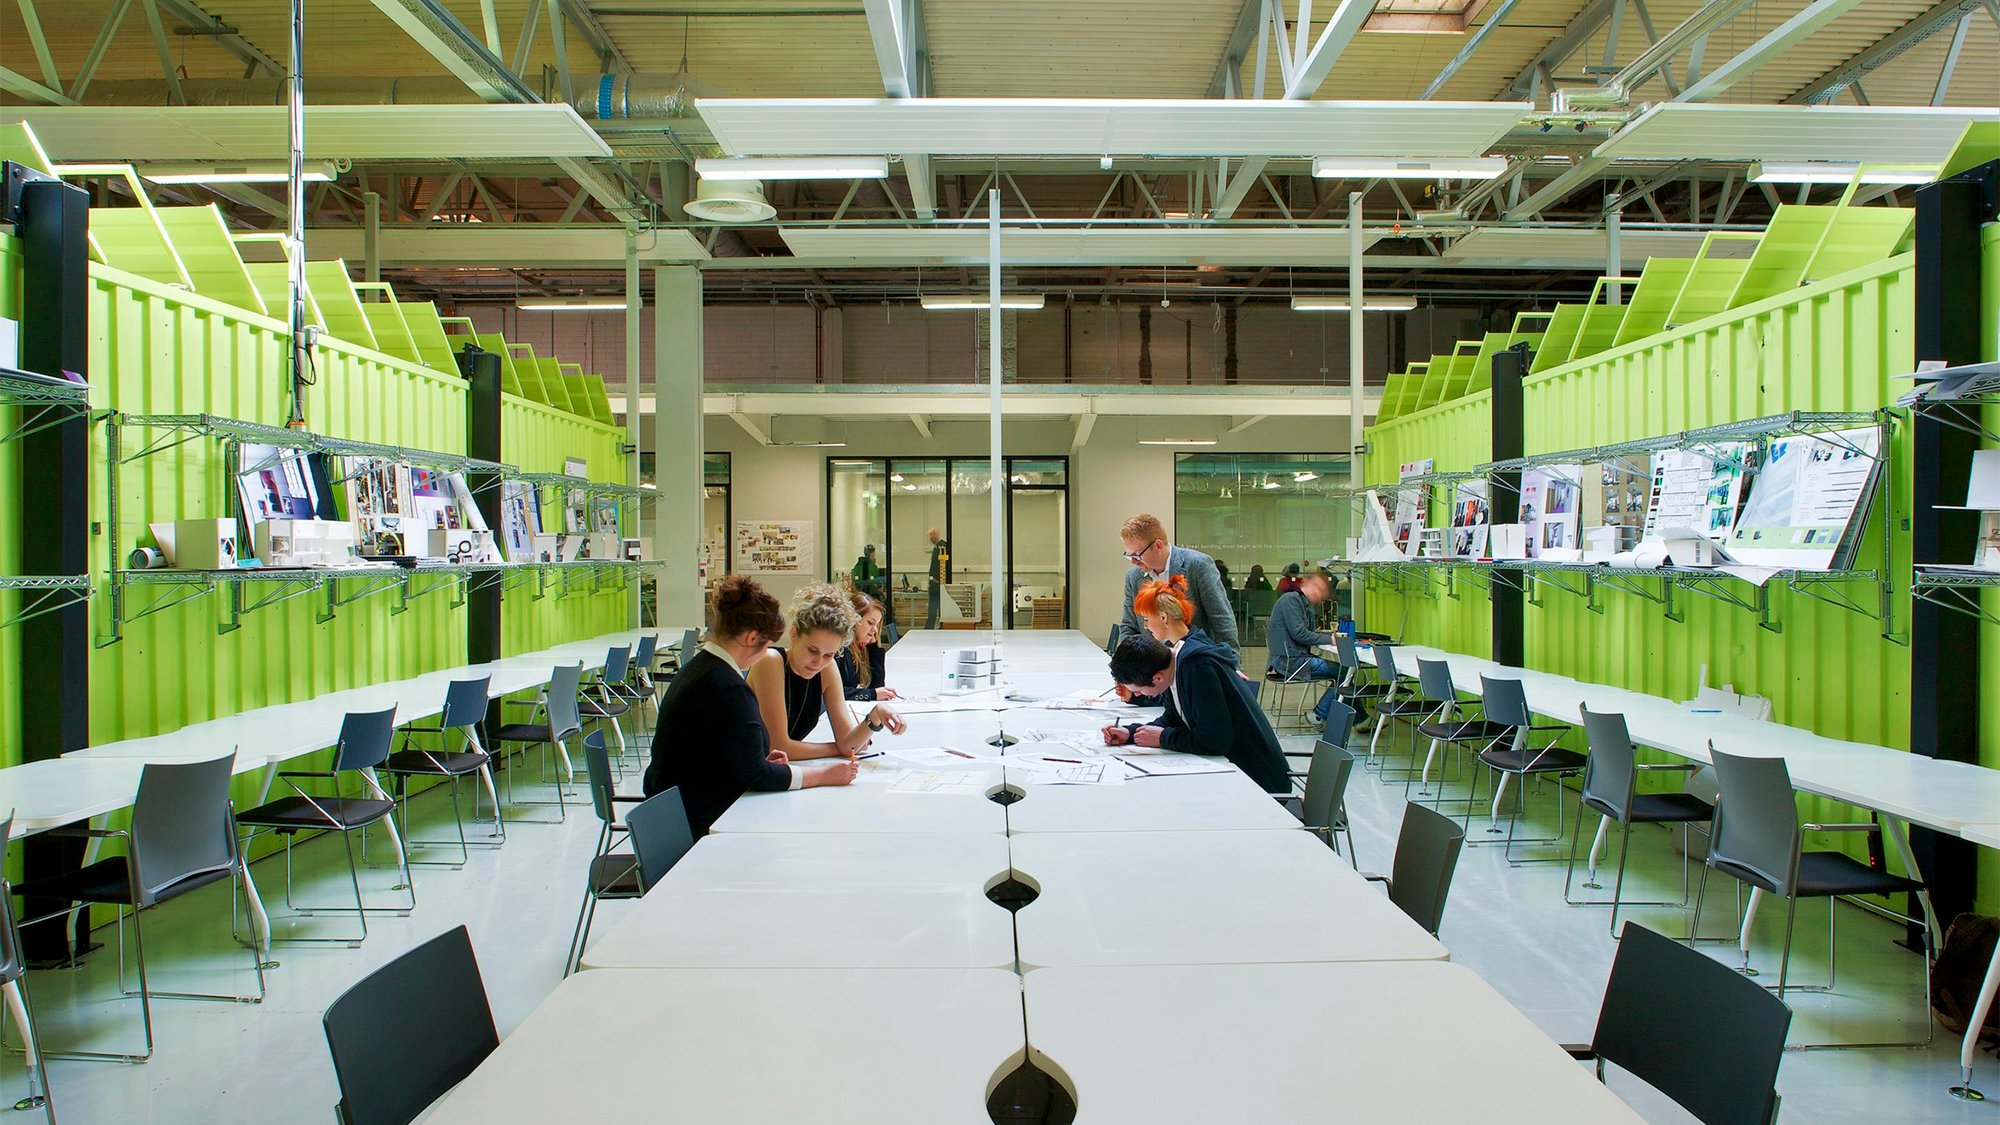 The newest educational space at Cork Institute of Technology, the Architecture Factory, is a third level educational and learning space situated in a formerly disused split-level warehouse. Photo: Janice O'Connell